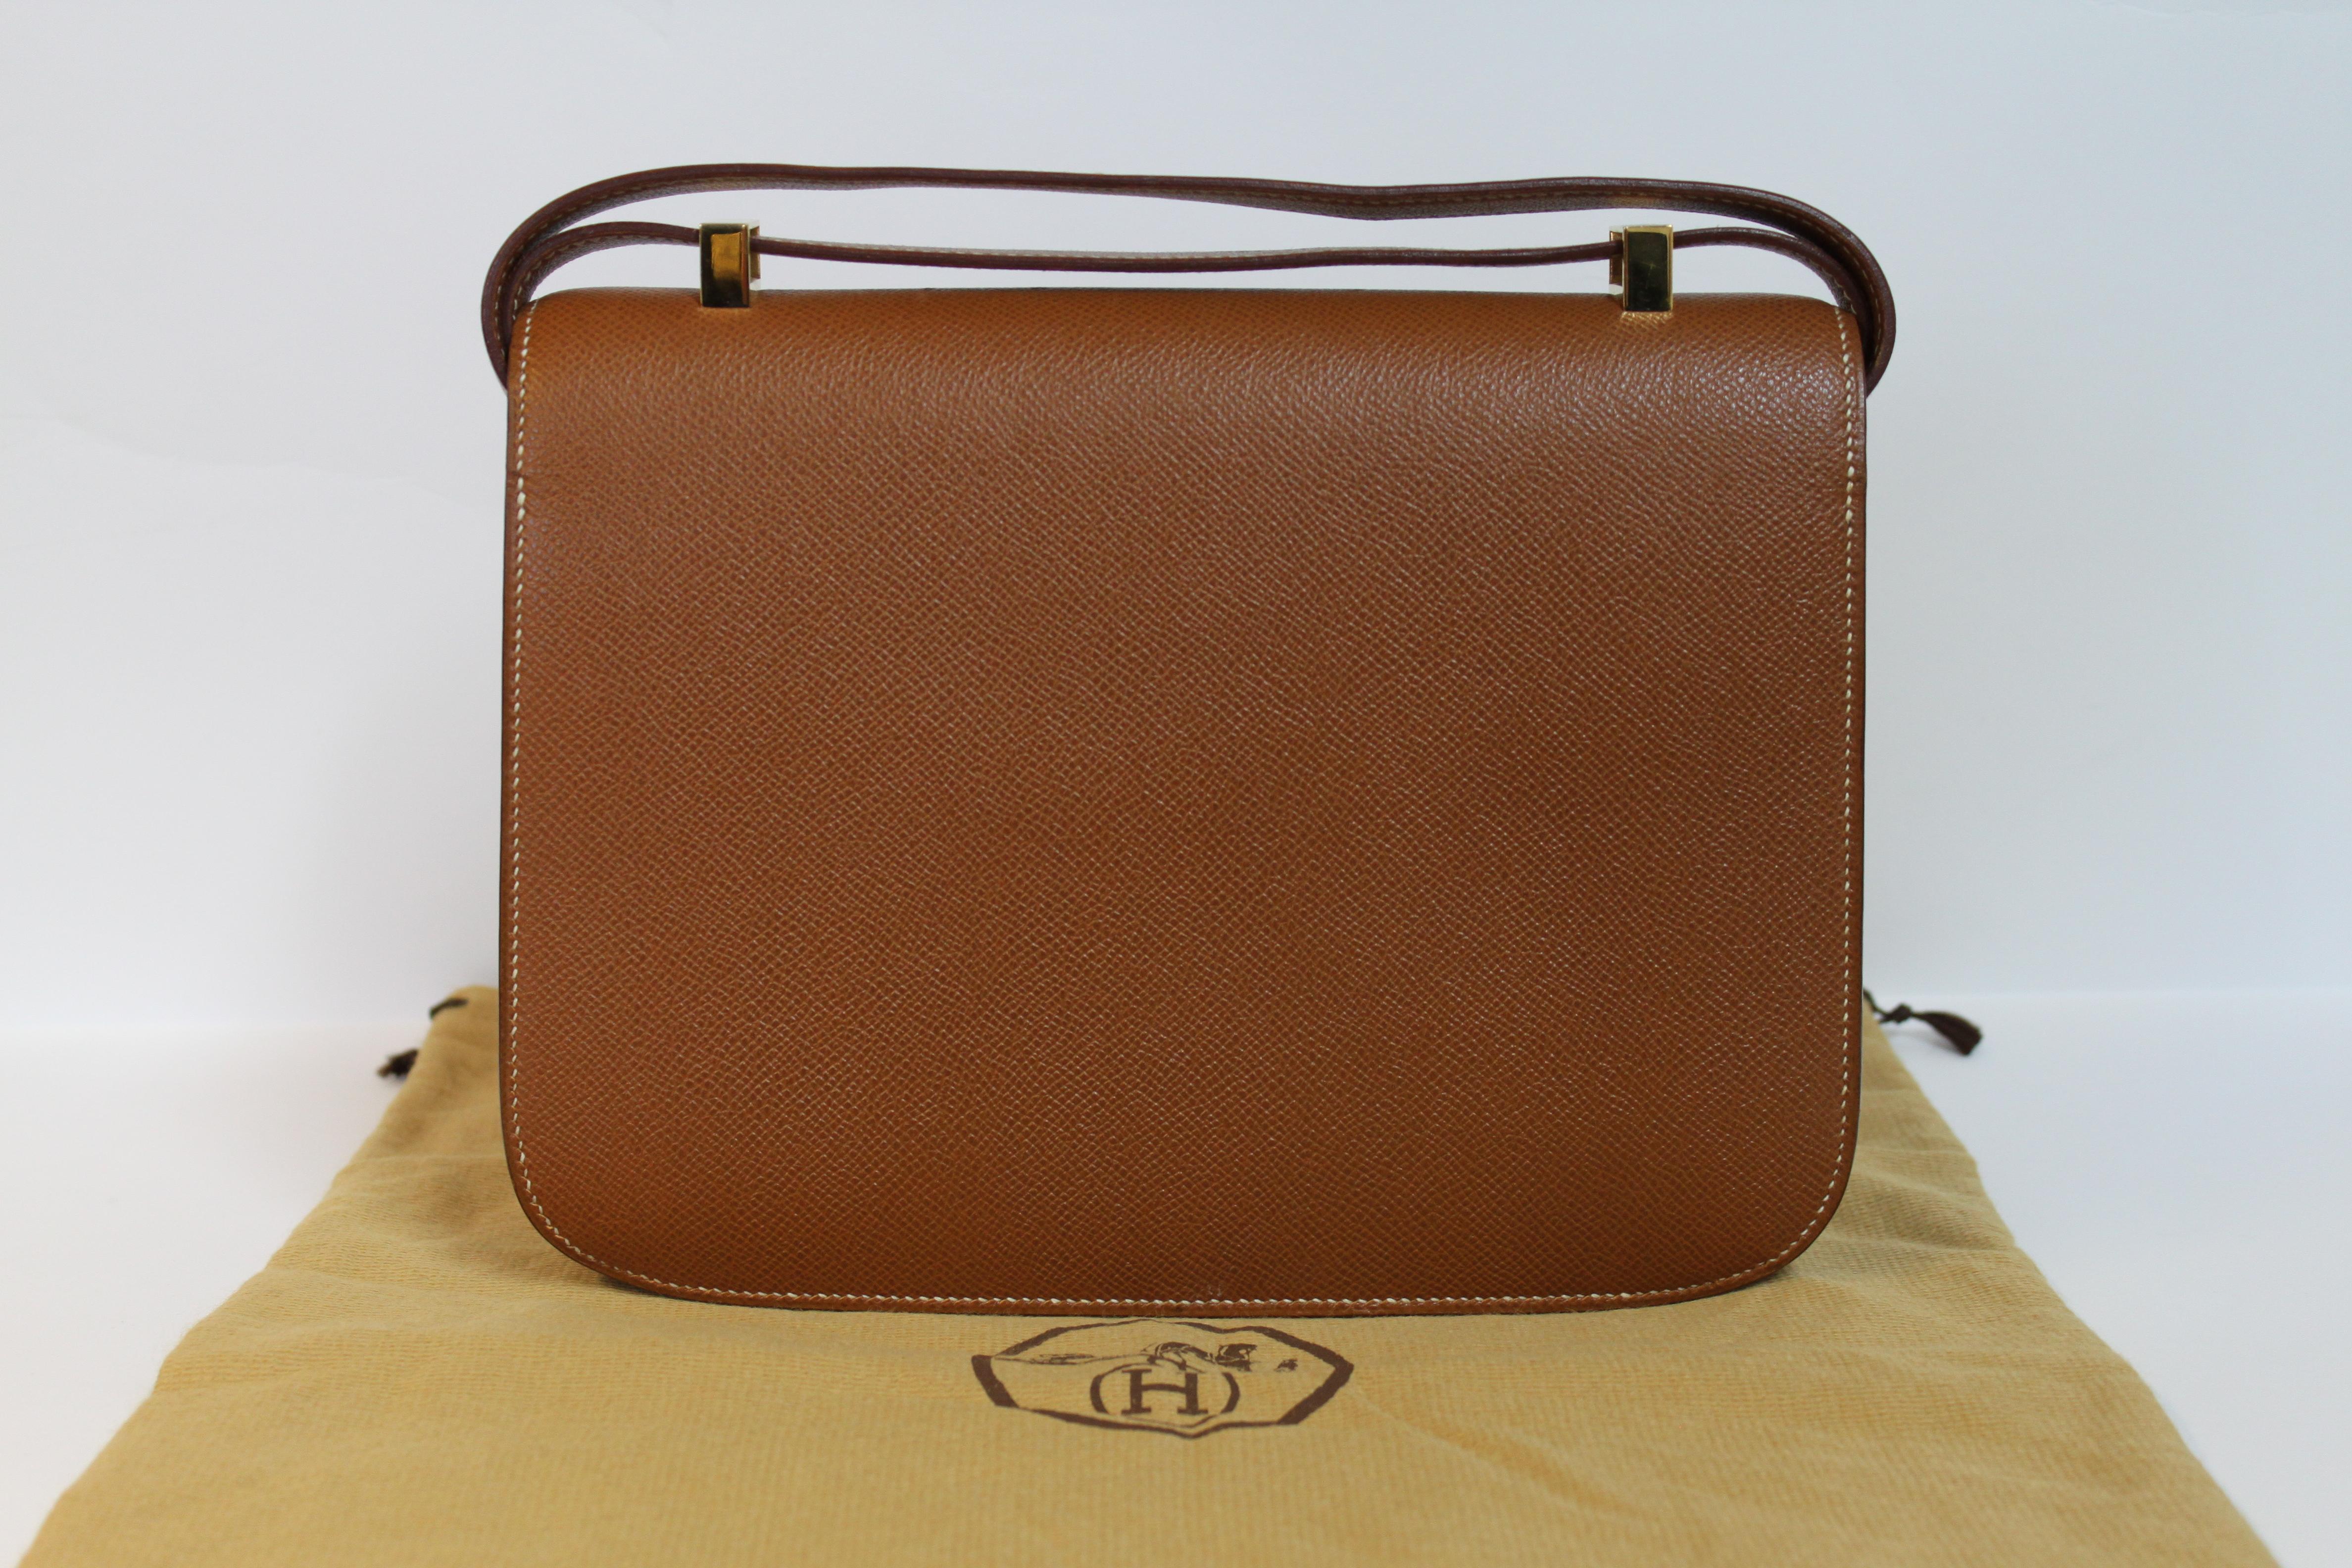 Hermes Constance 24 Shoulder Bag brown/tan epsom leather with gold Hardware In Excellent Condition For Sale In Berlin, DE